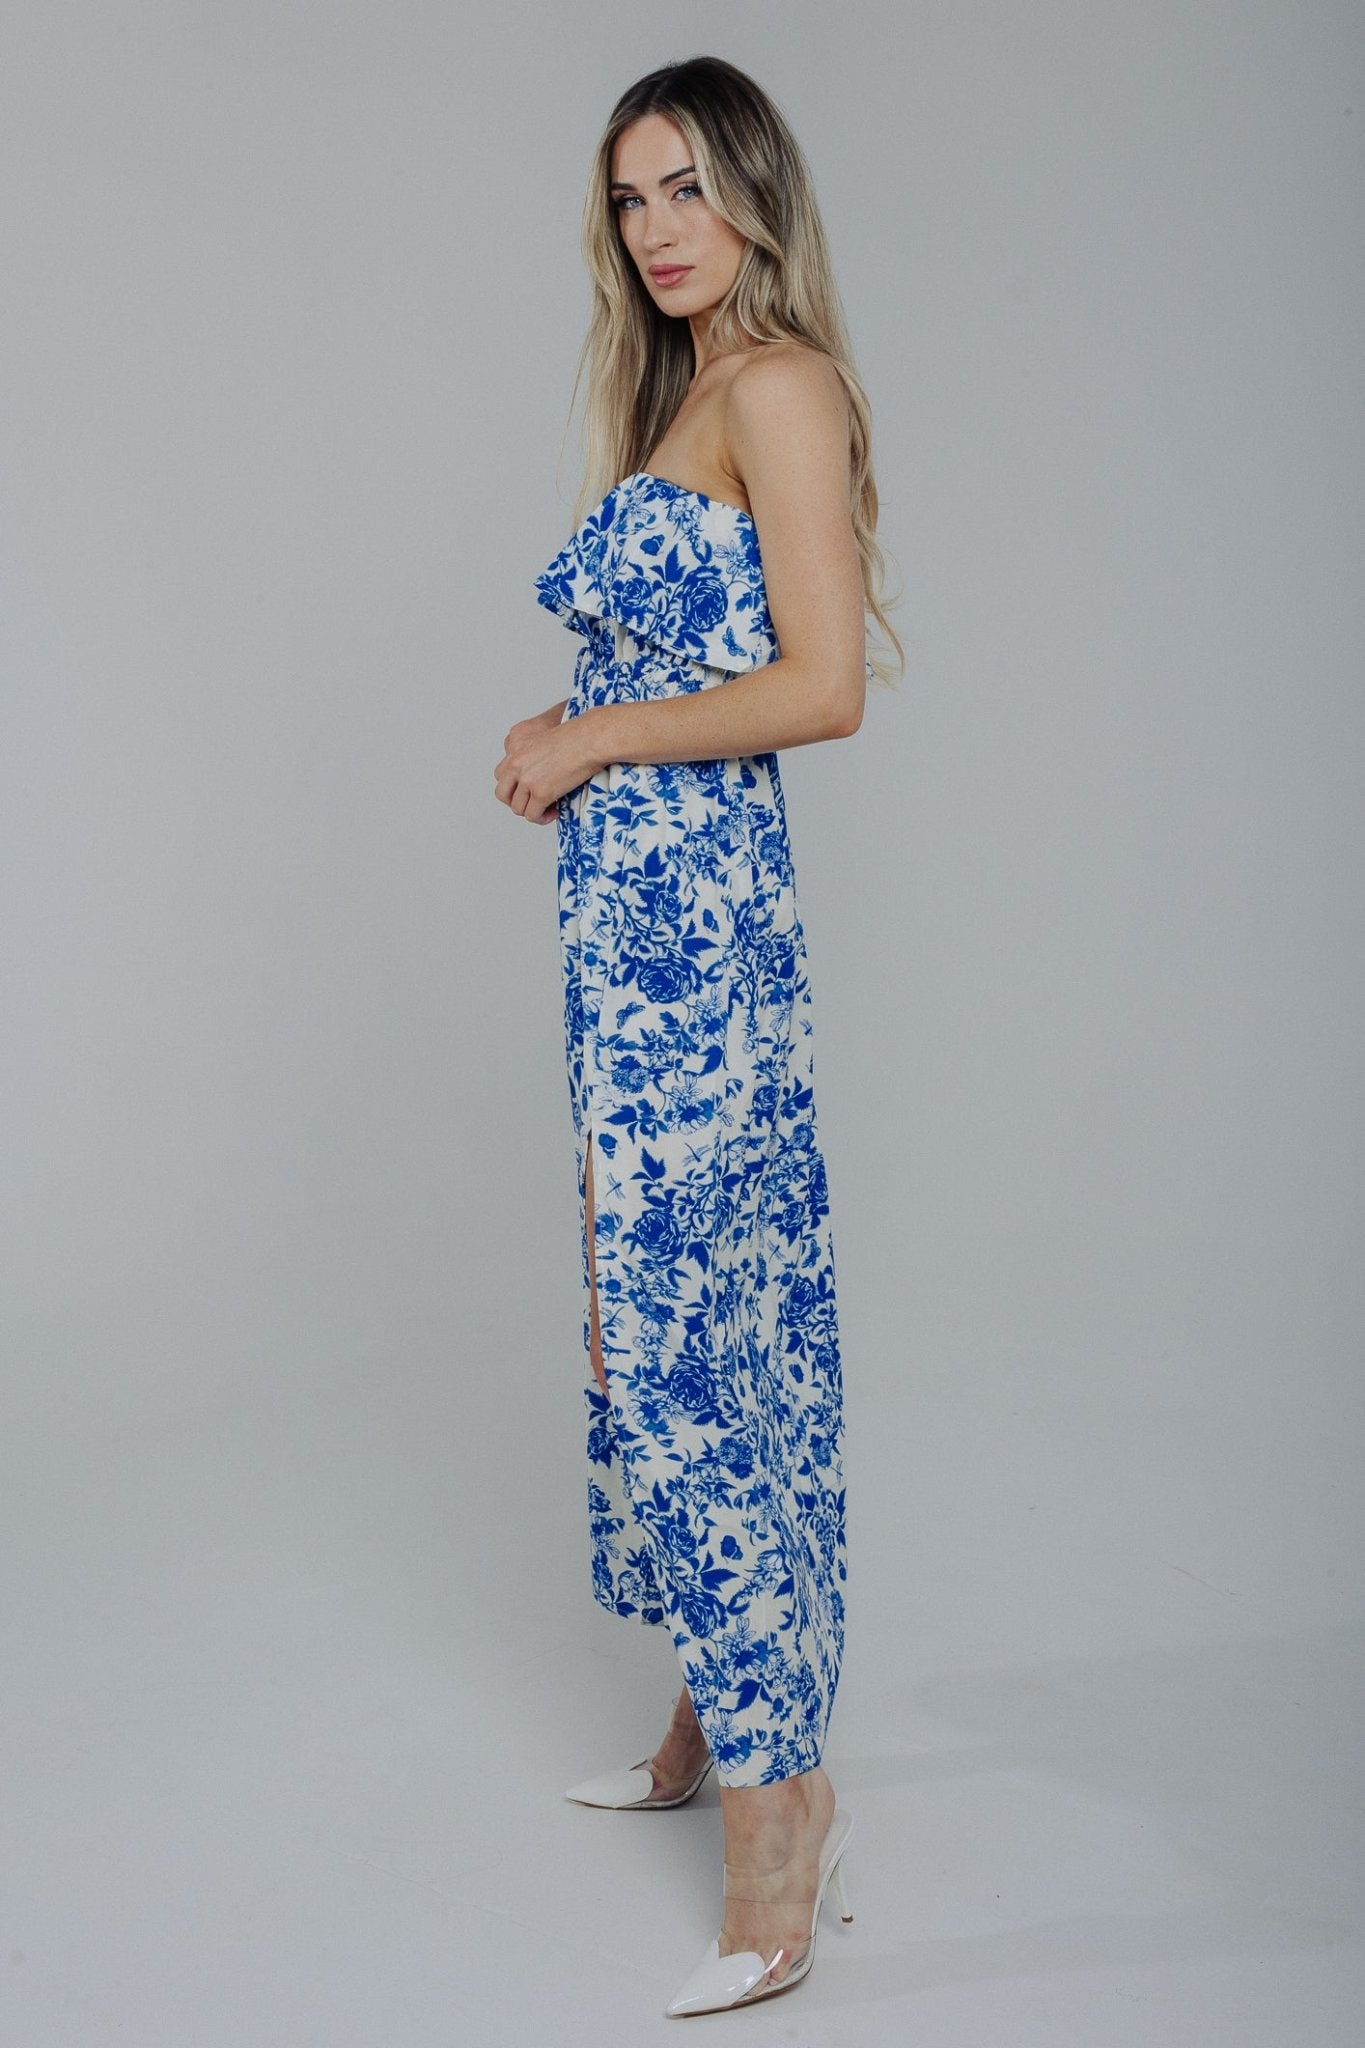 Polly Strapless Maxi Dress In Blue Print - The Walk in Wardrobe